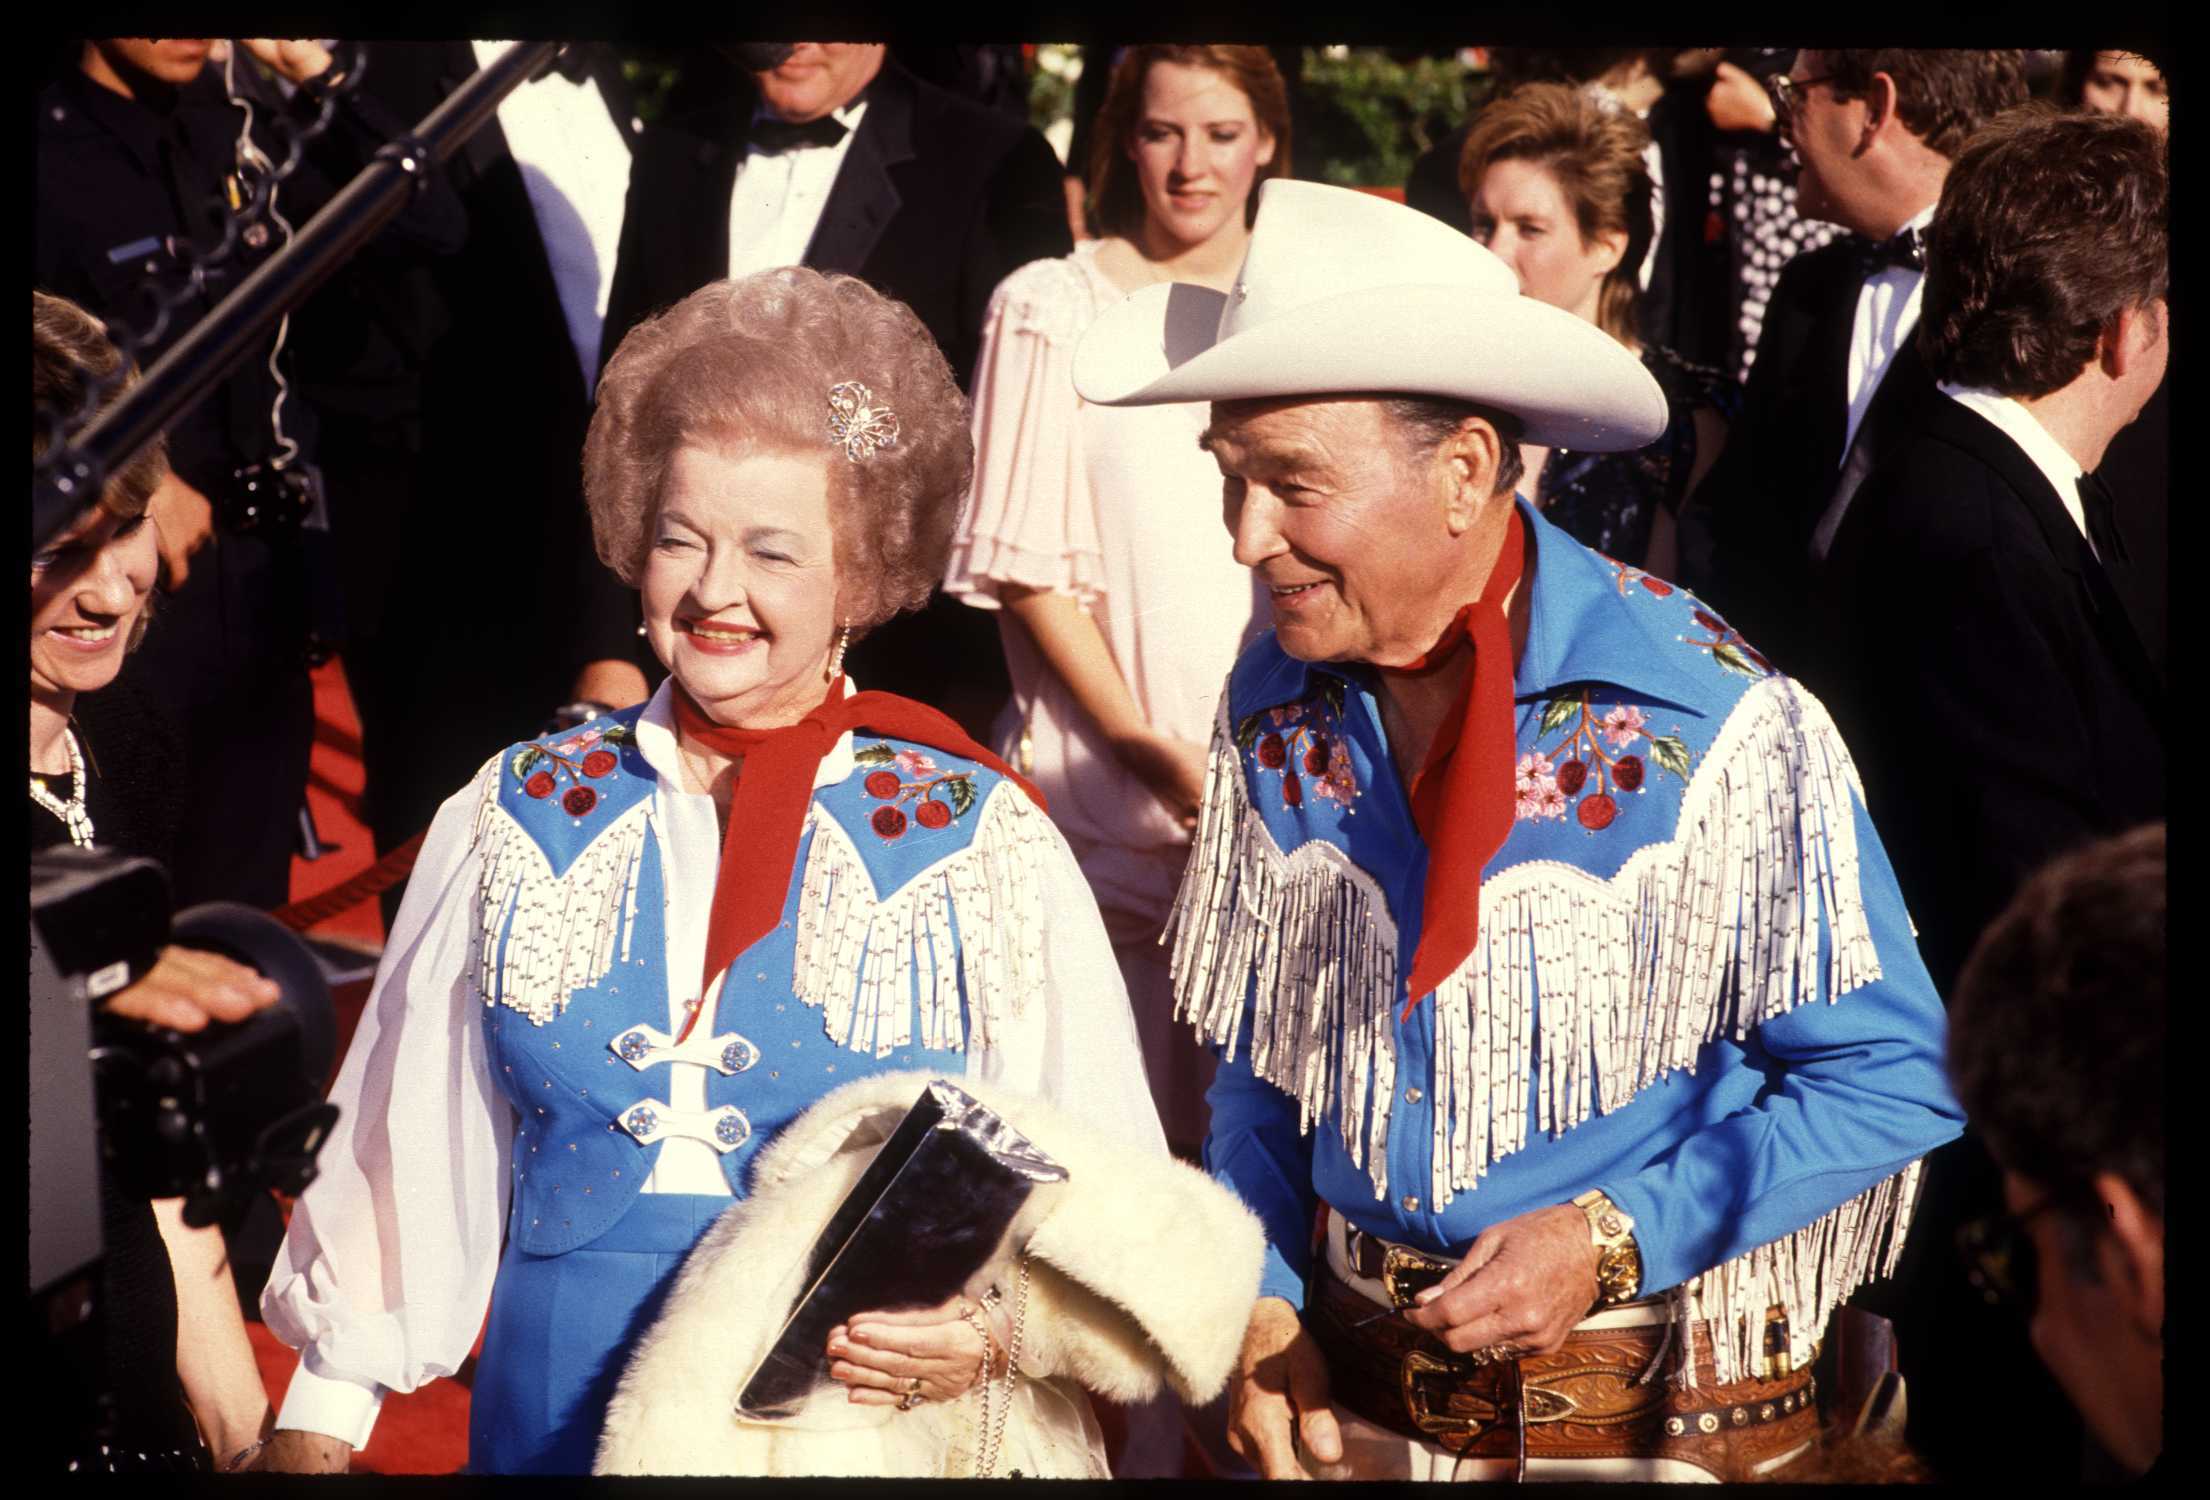 Roy Rogers And Dale Evans Arriving At The 1991 Oscar Show. | Source: Getty Images.